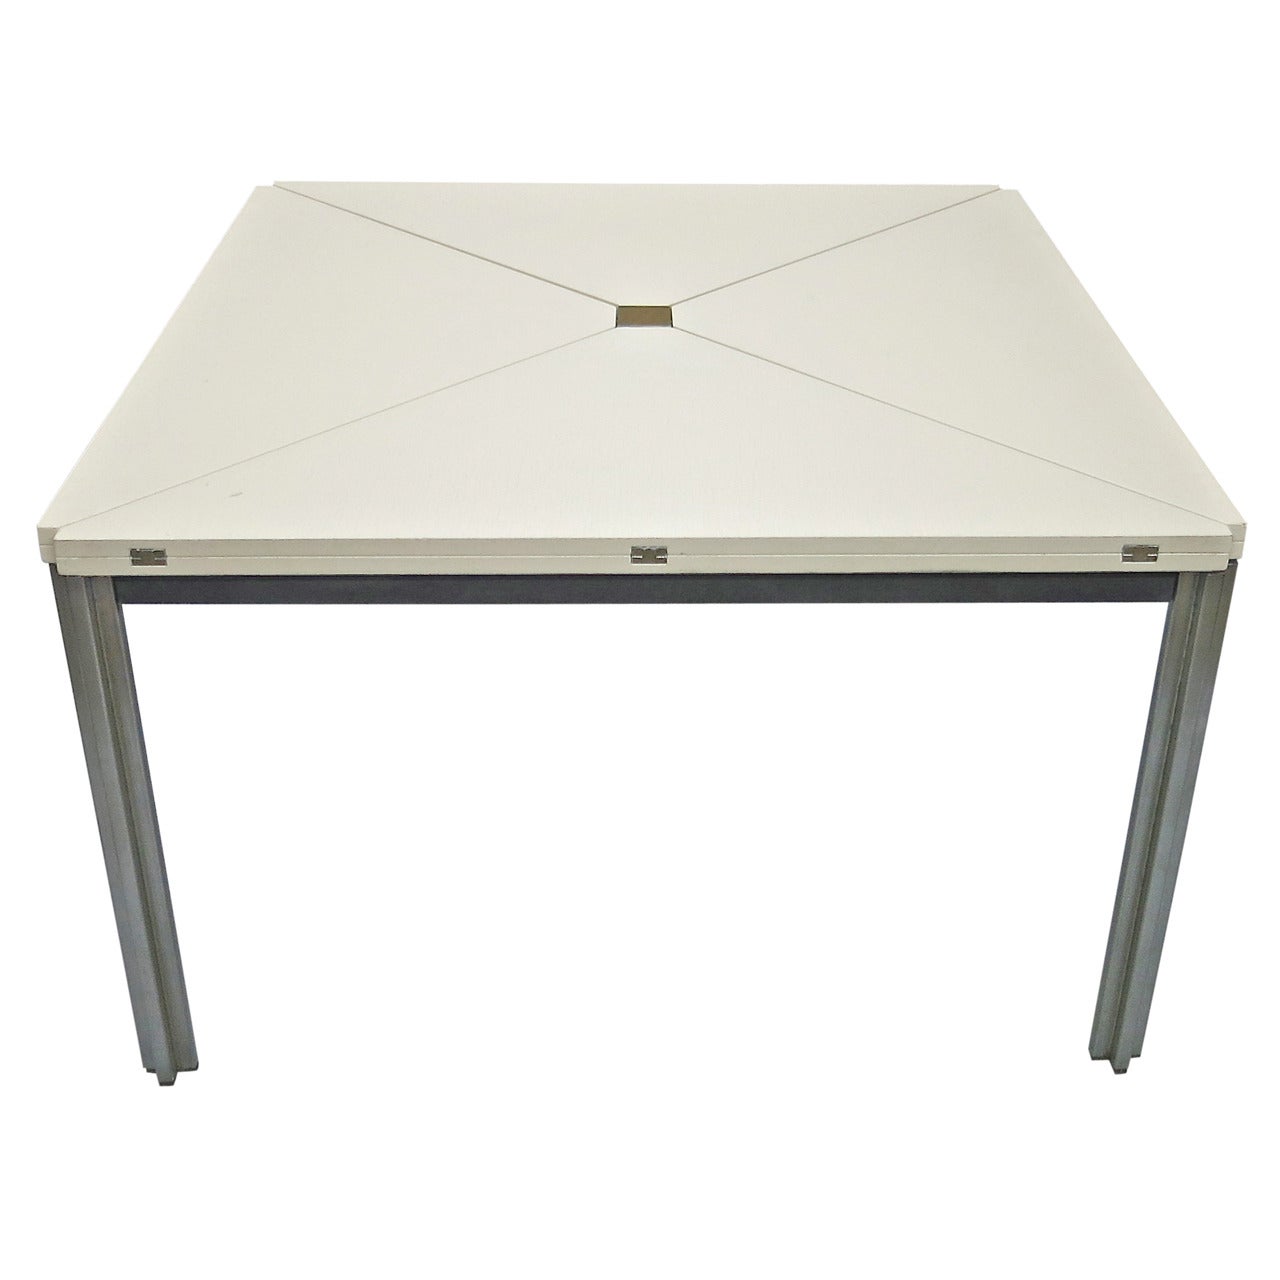 T92 Folding Table by Eugenio Gerli and Mario Cristiani for Tecno, Italy 1960 For Sale